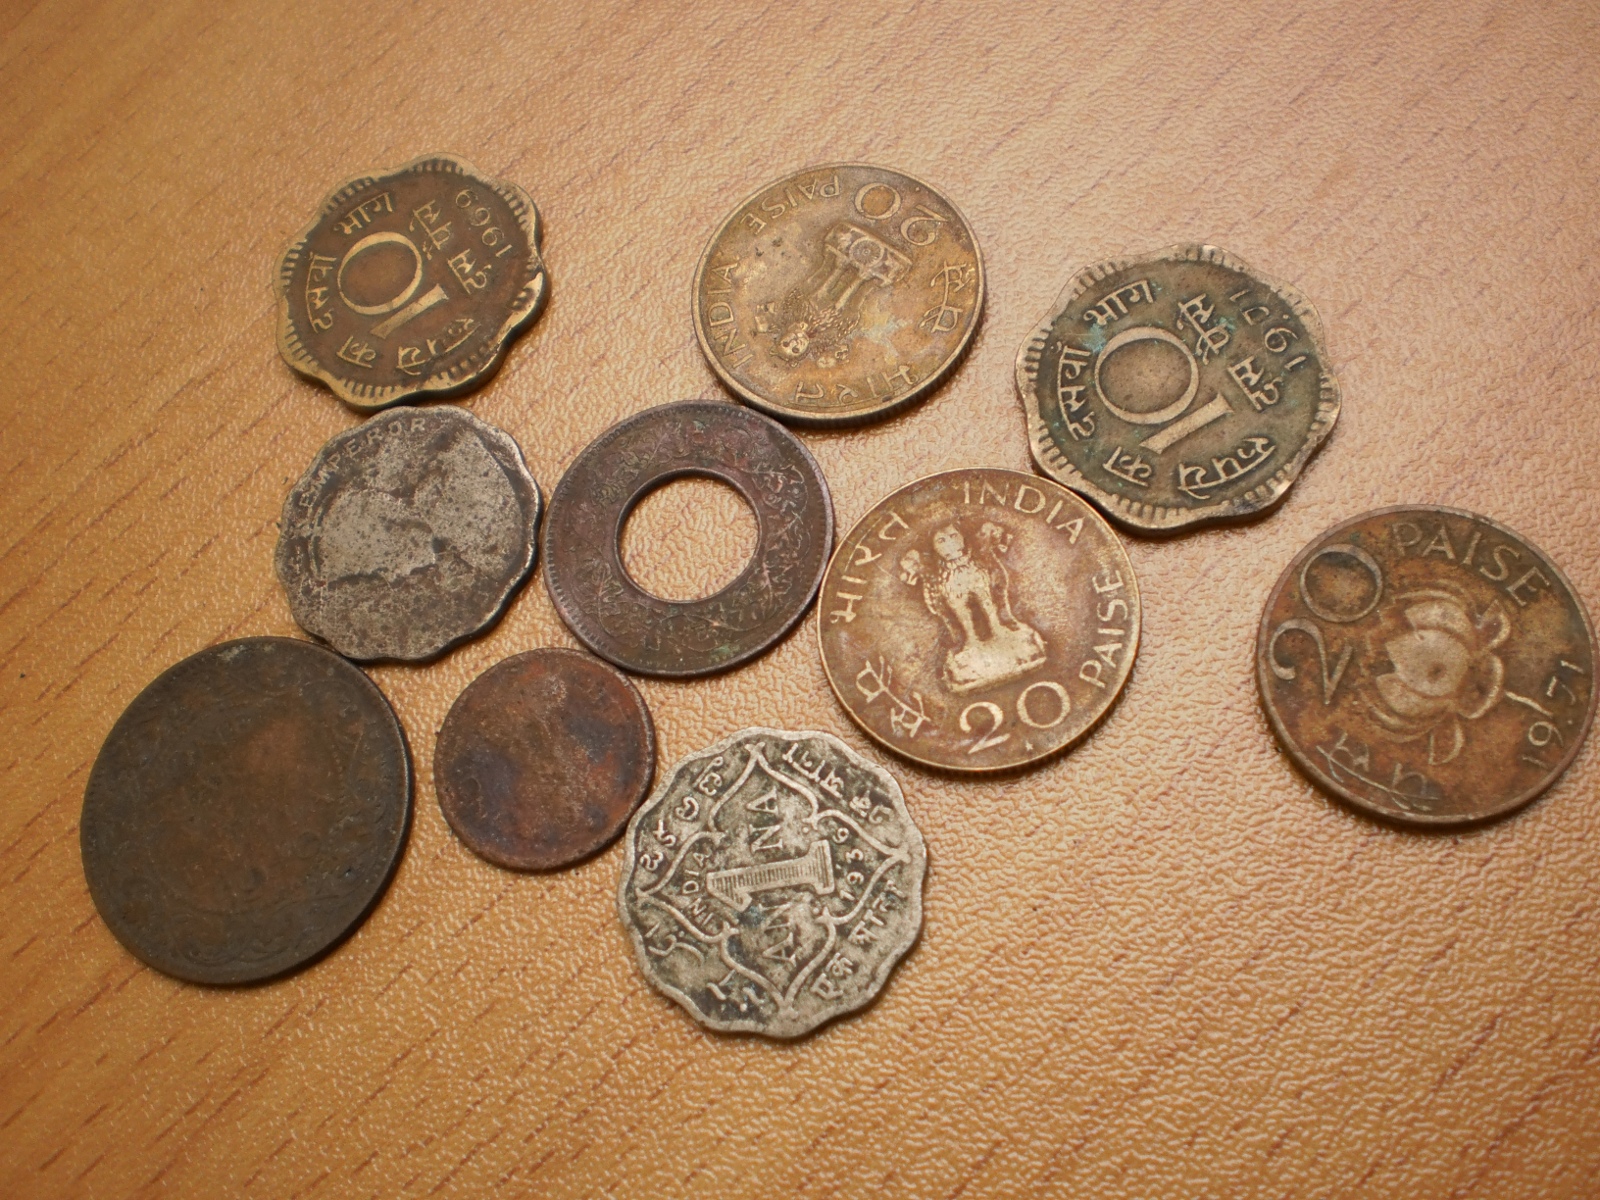 File:A Collection of Old Indian Coins.jpg - Wikimedia Commons